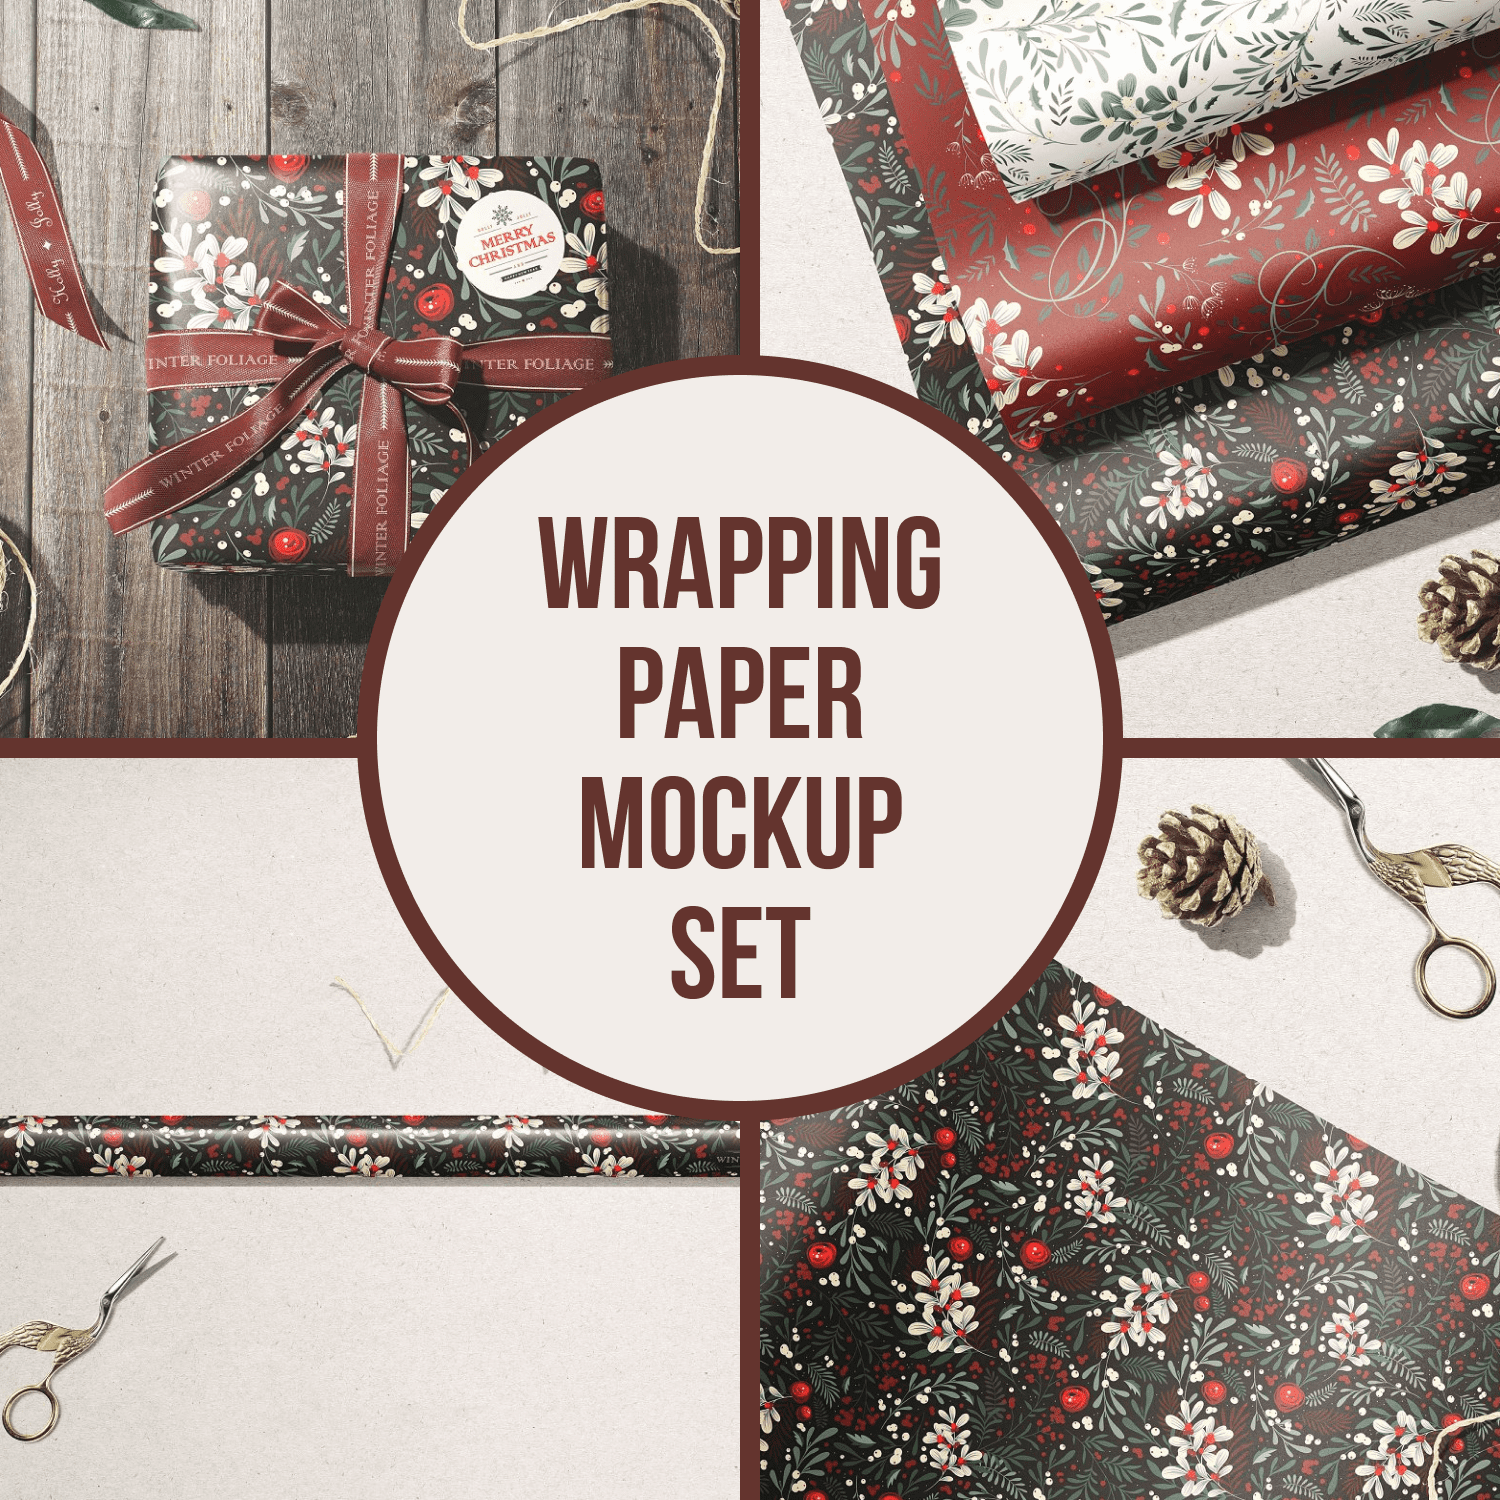 Wrapping Paper Mockup Set main cover.